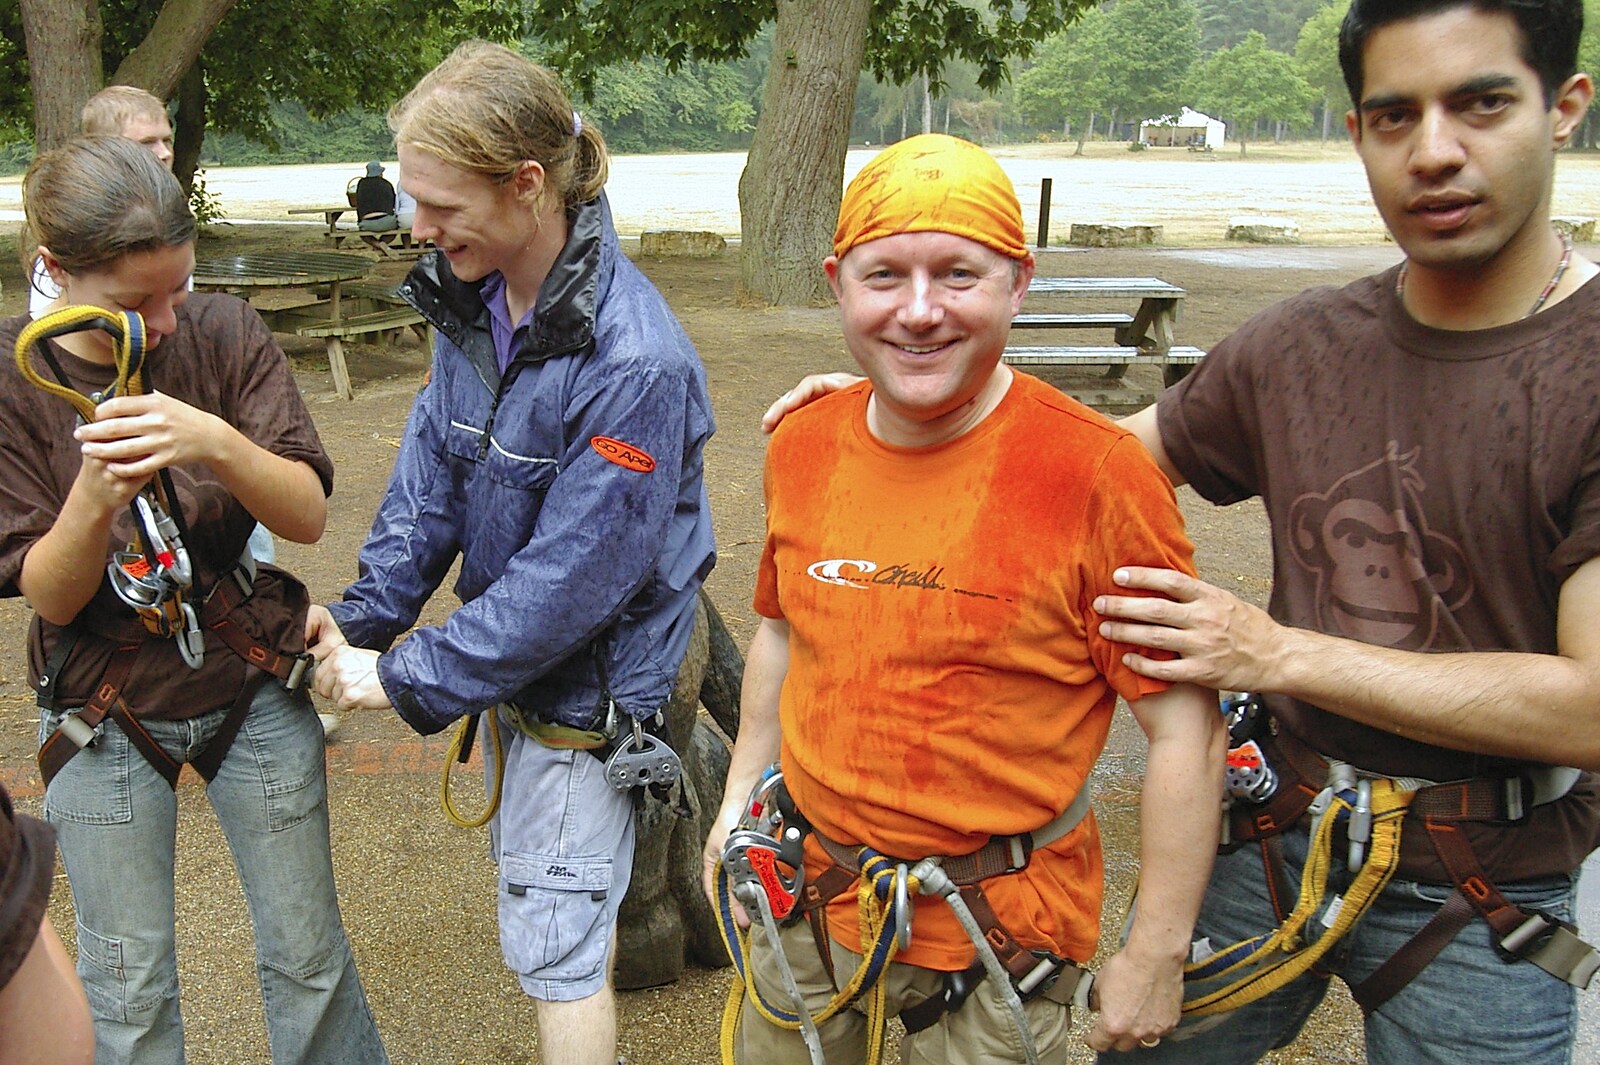 Martin 'pirate' D stands out in bright orange from Qualcomm Cambridge "Go Ape", High Lodge, Thetford Forest - 27th July 2006